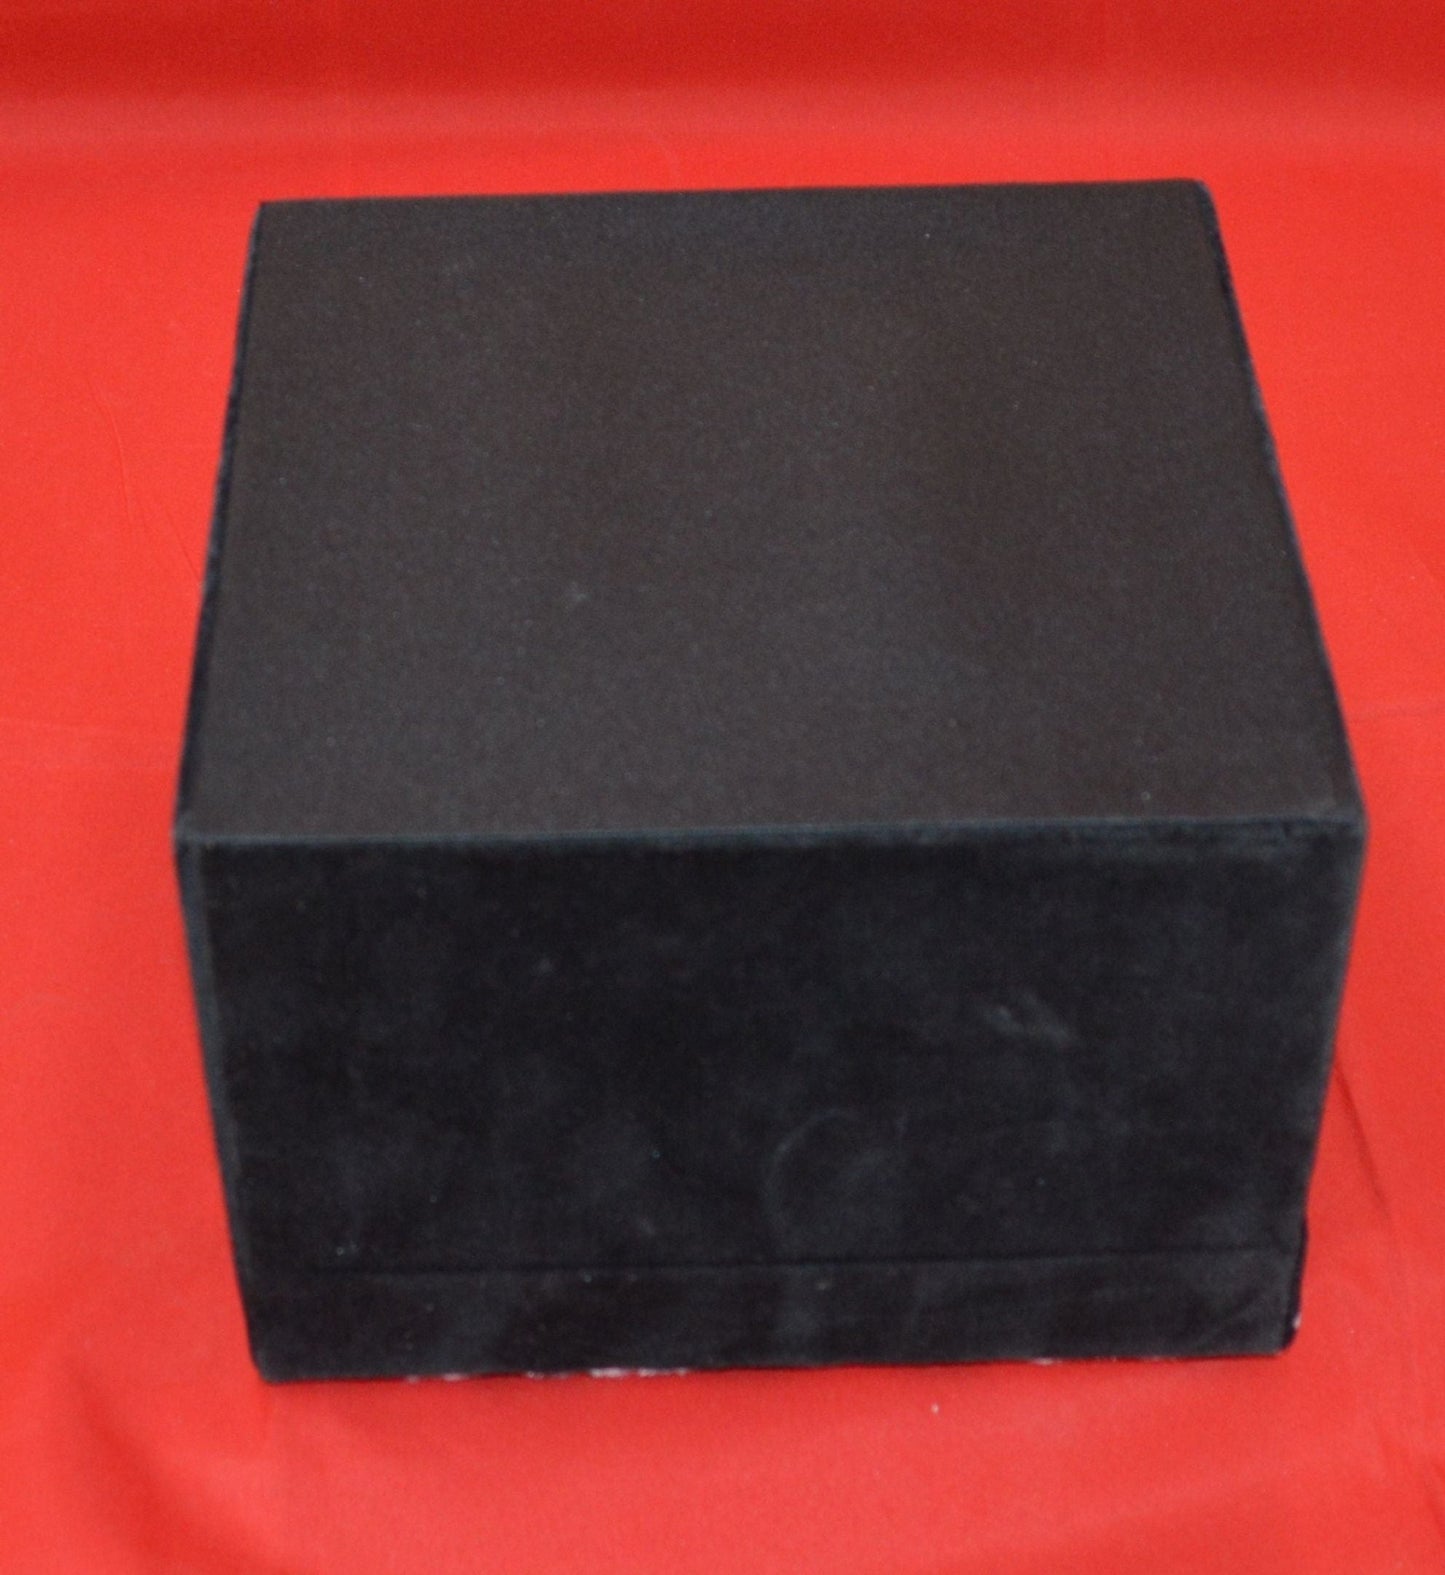 BLACK AND WHITE KEEPSAKE/JEWELLERY BOX(PREVIOUSLY OWNED) GOOD CONDITION - TMD167207